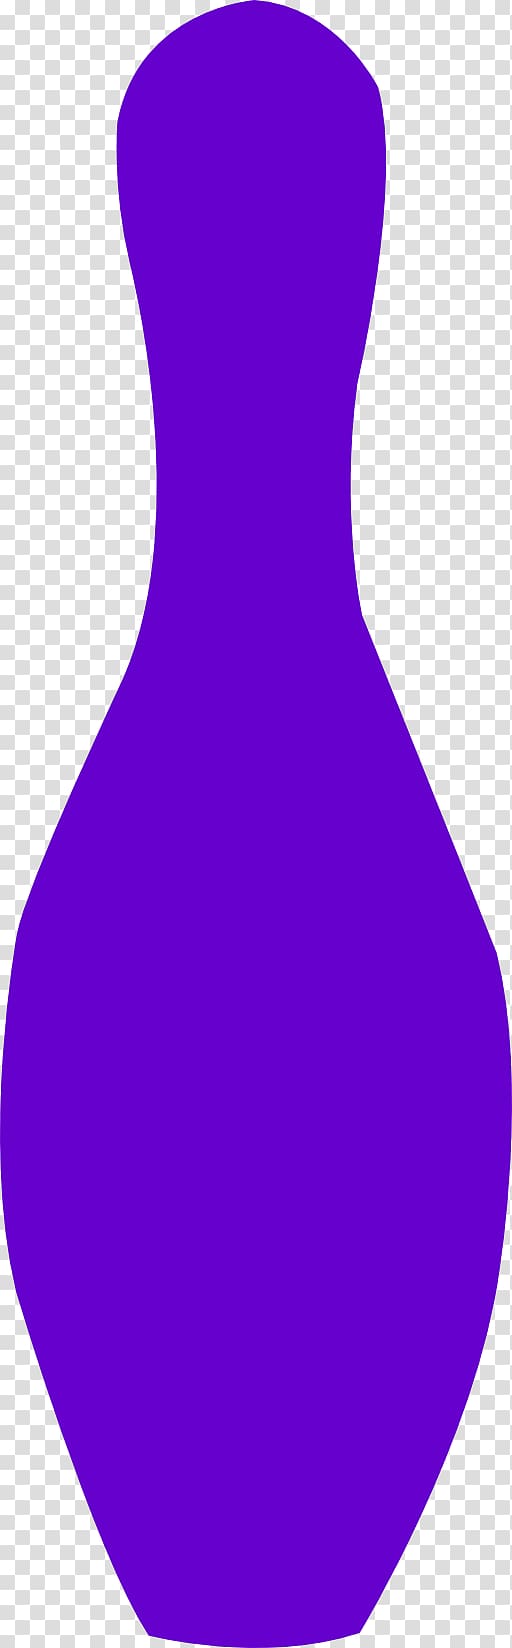 Bowling pin Ten-pin bowling Skittles , Purple Skittles transparent background PNG clipart